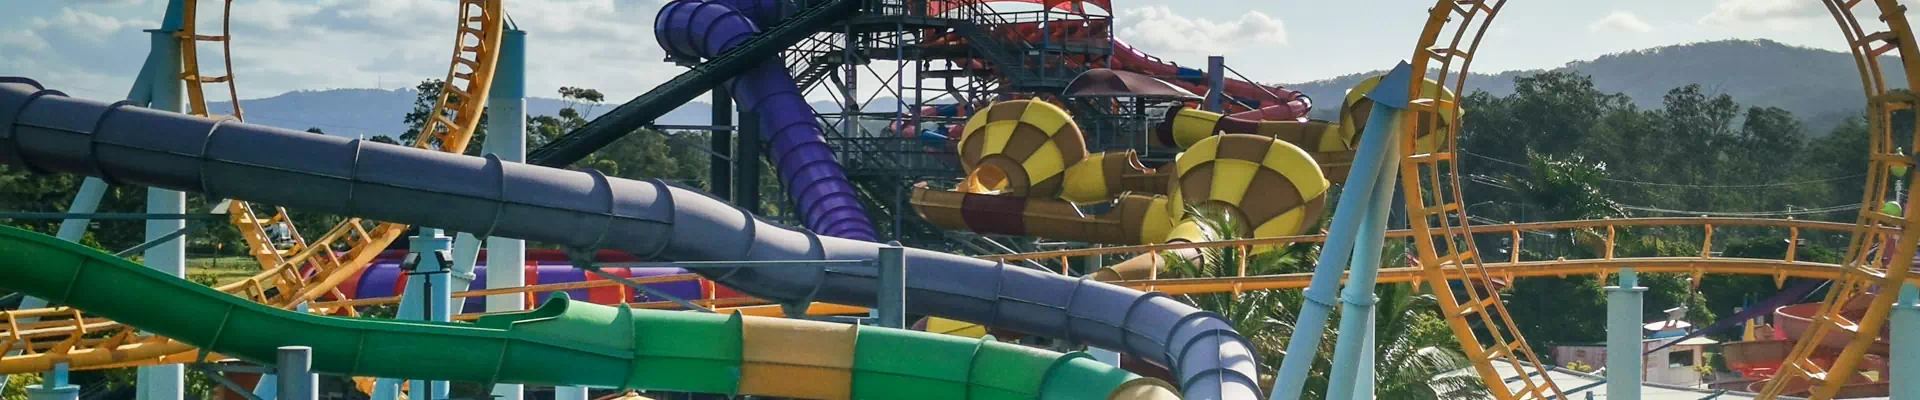 A short visit to Whitewater World